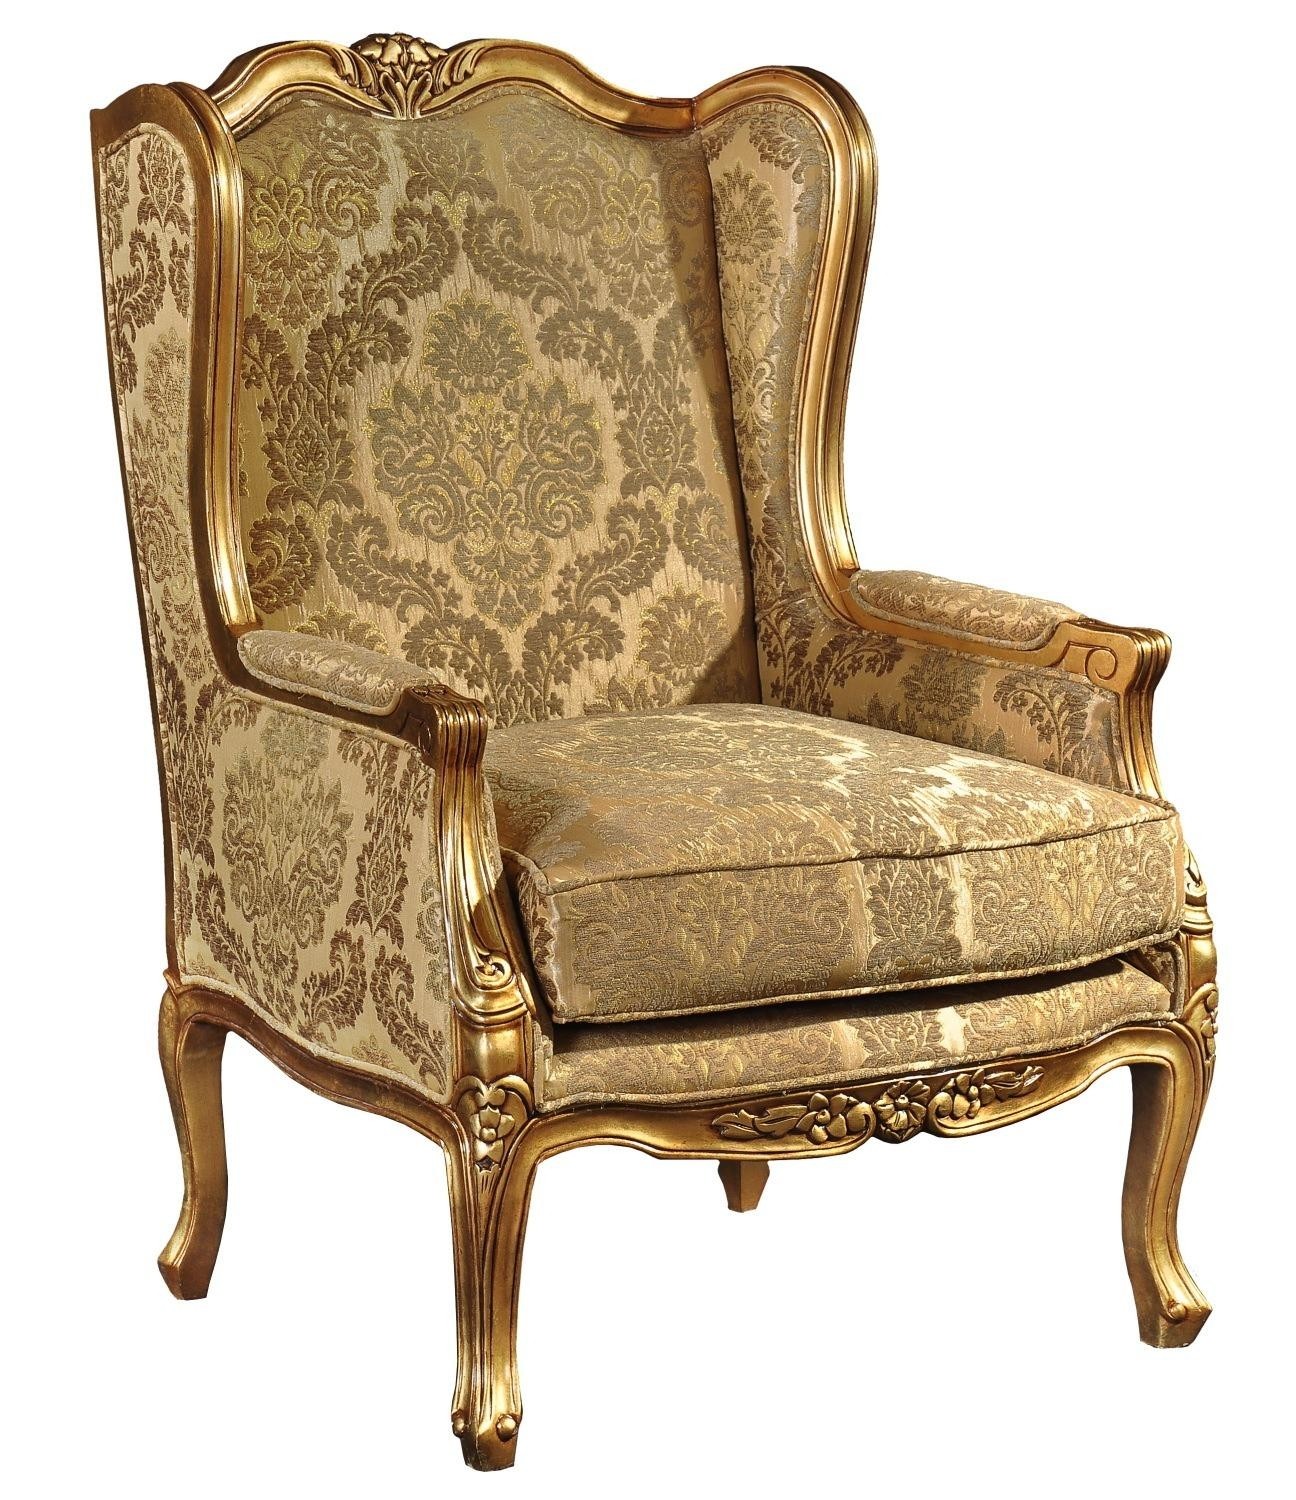 Classic english upholstery for immediate delivery